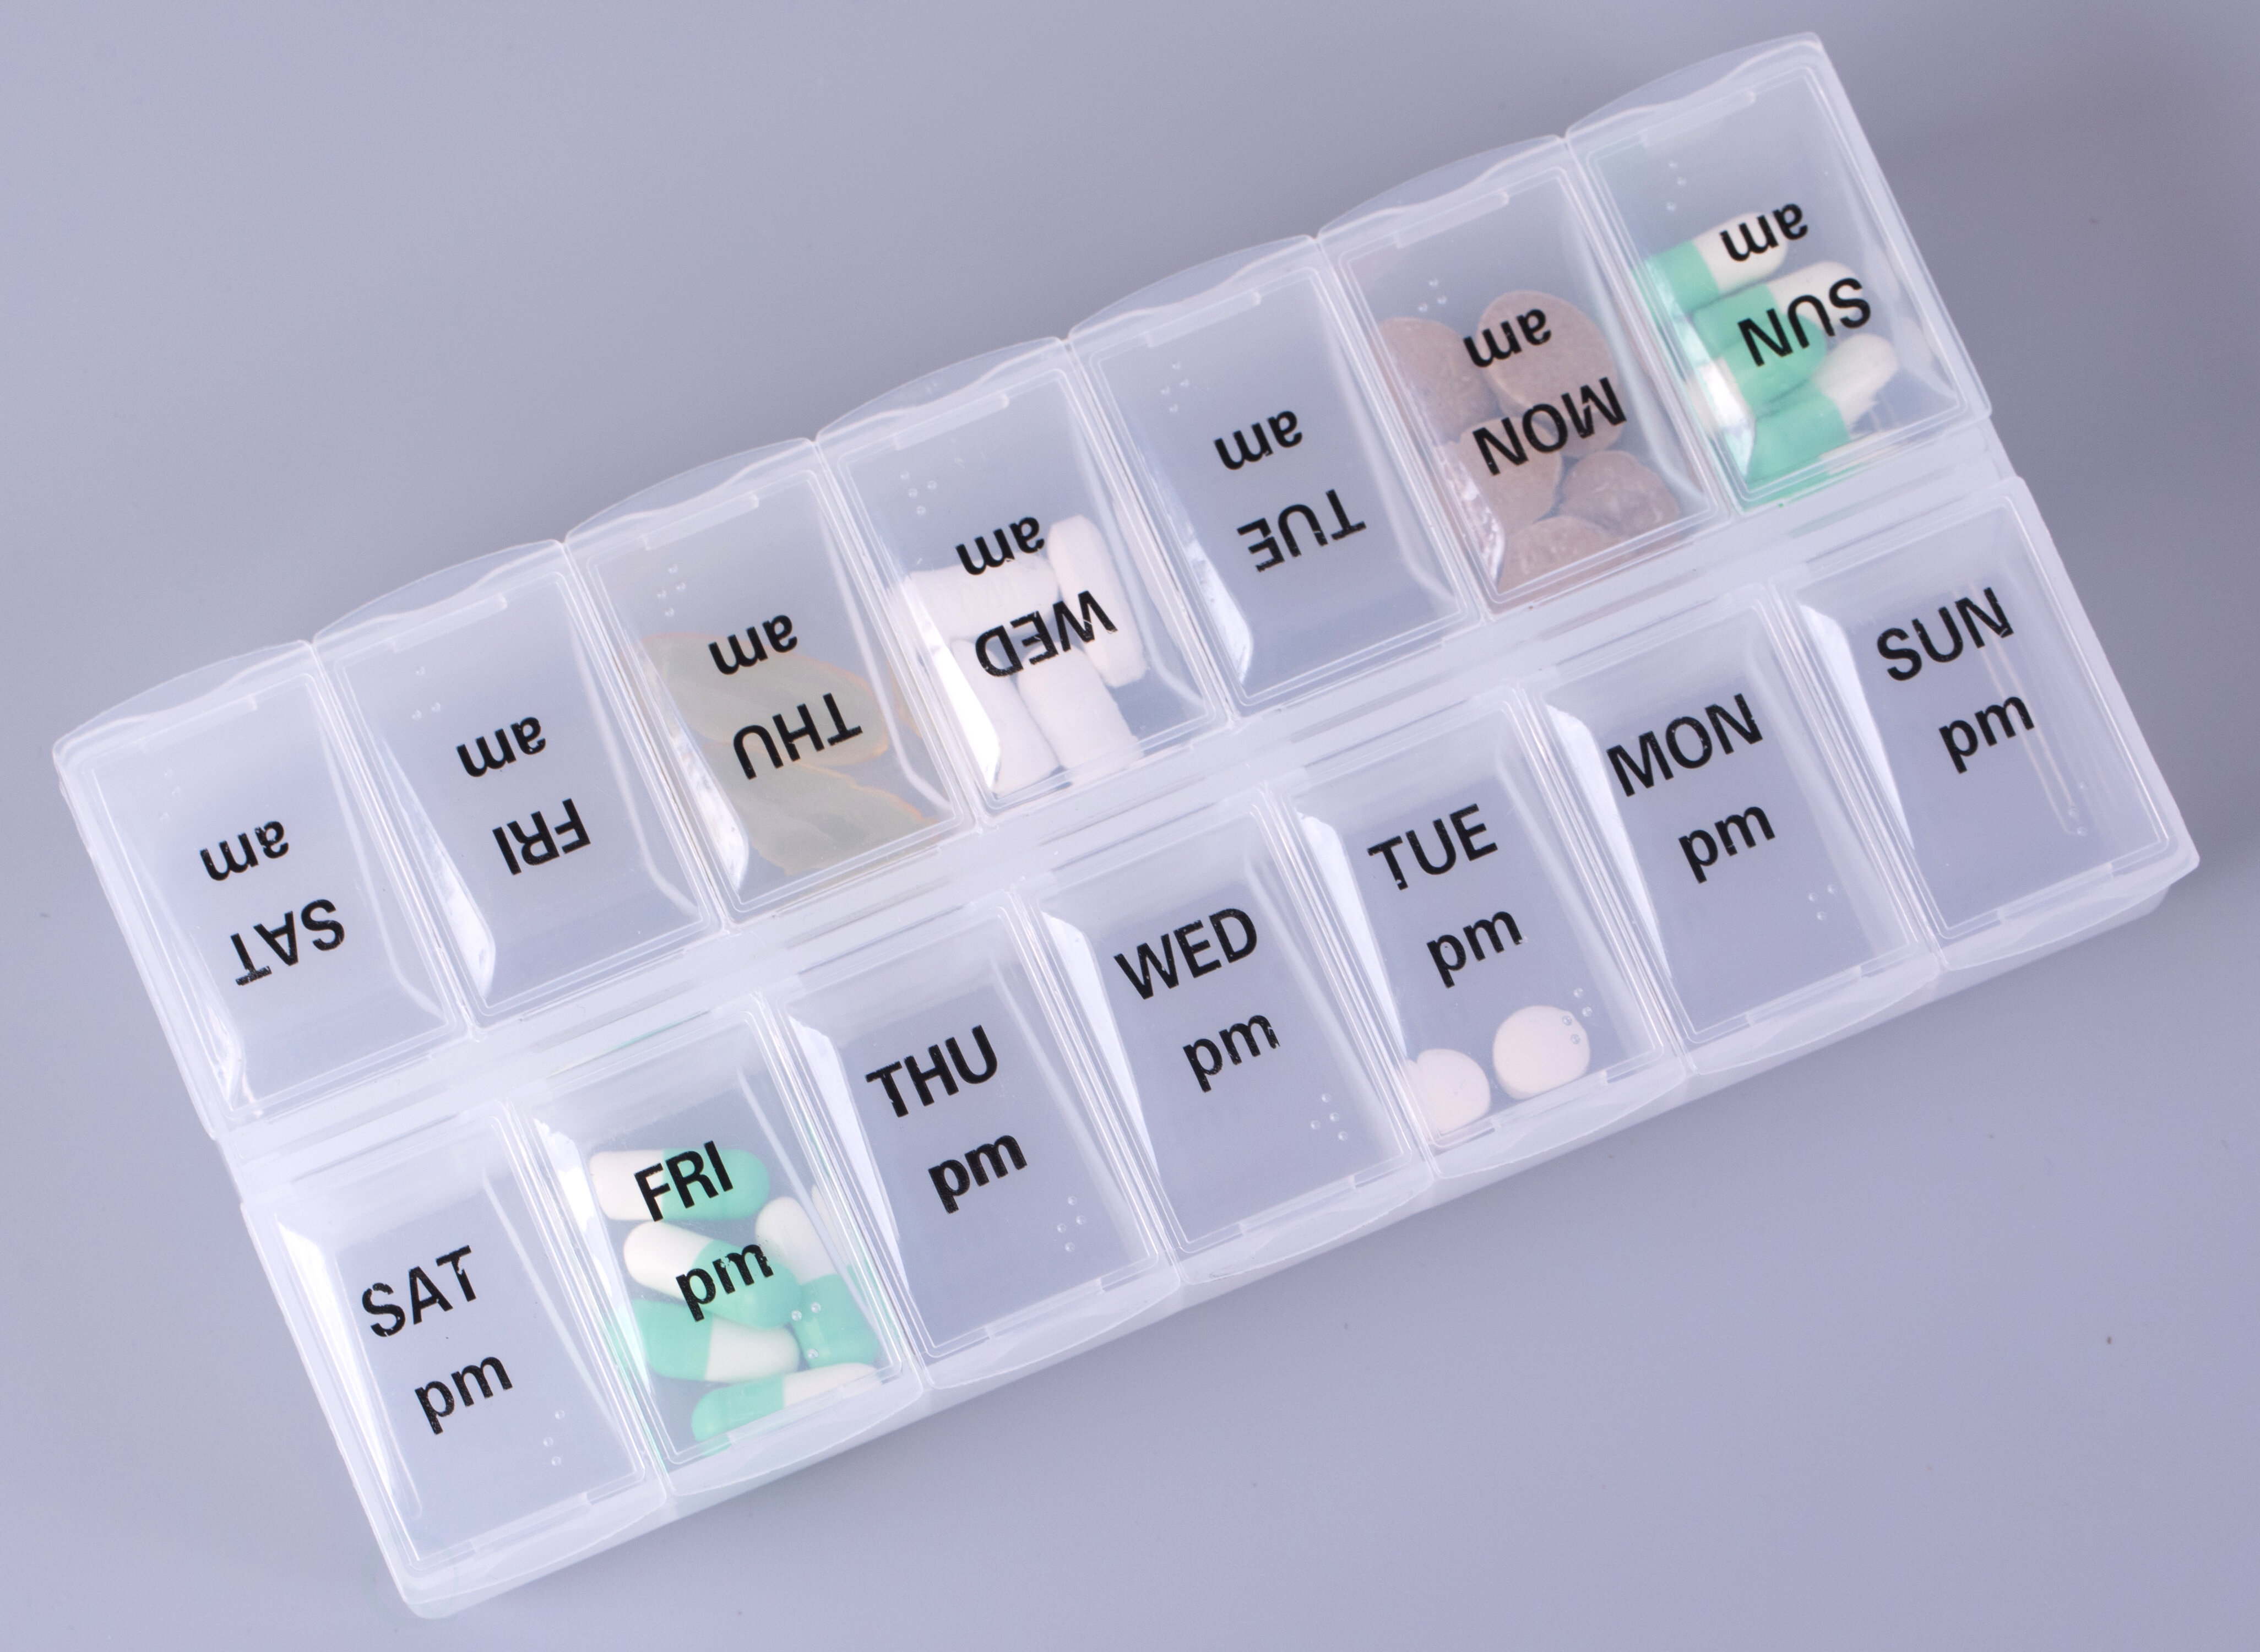 Monthly Pill Organizer - Am/Pm Daily Pill Organizer 32 Compartments for  Each Day, Pill Dispenser and Dispenser Caddy That Helps You Organize Your